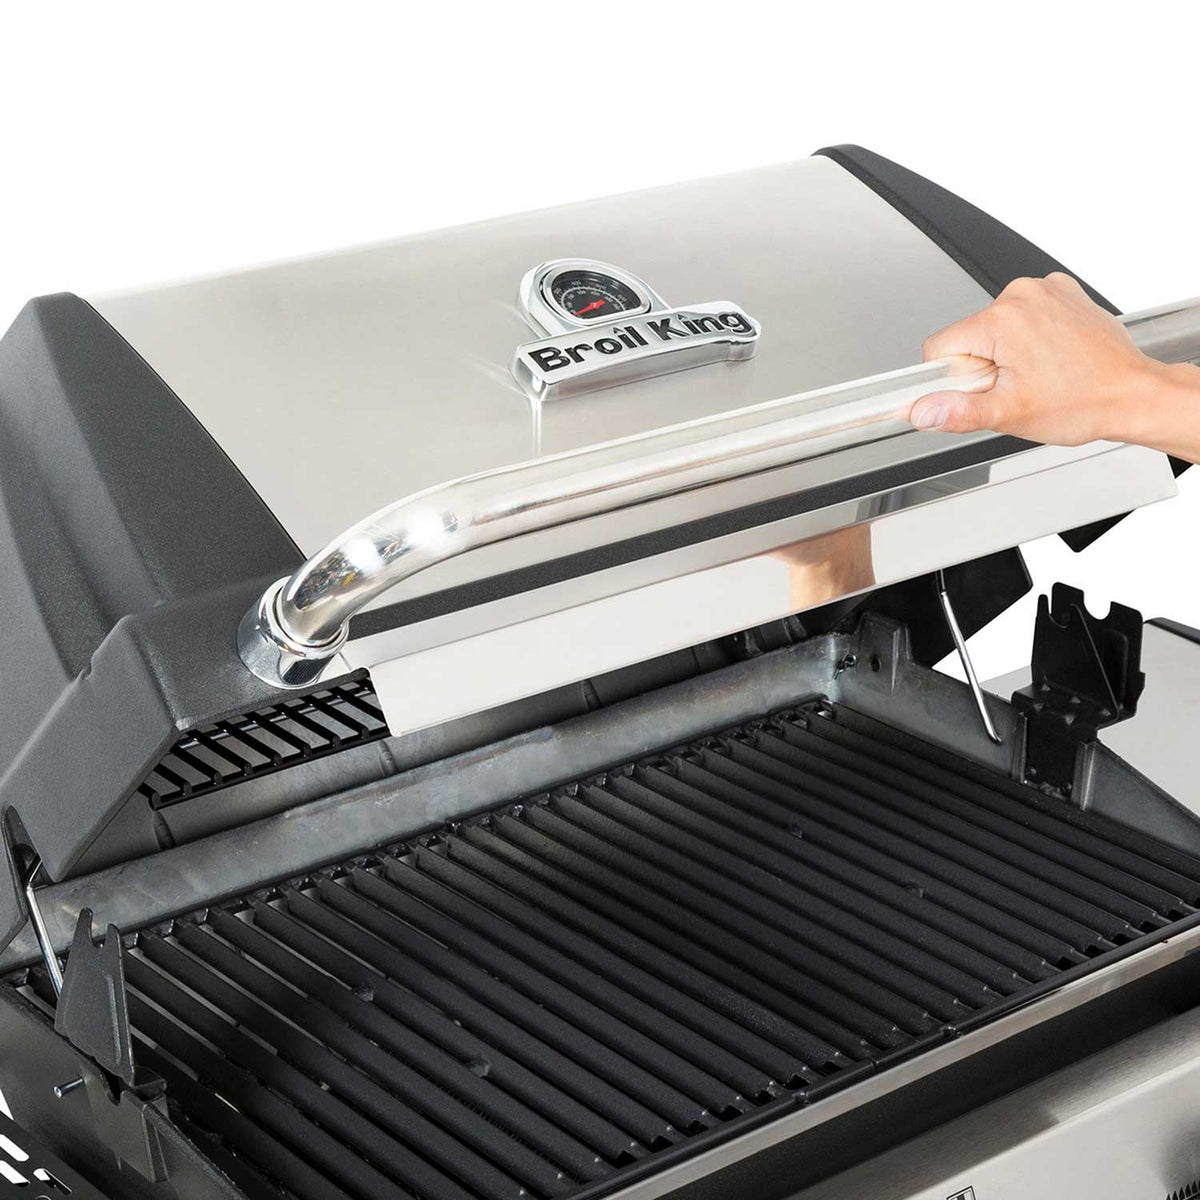 Broil King Signet 390 Gas Grill Open Lid Close up